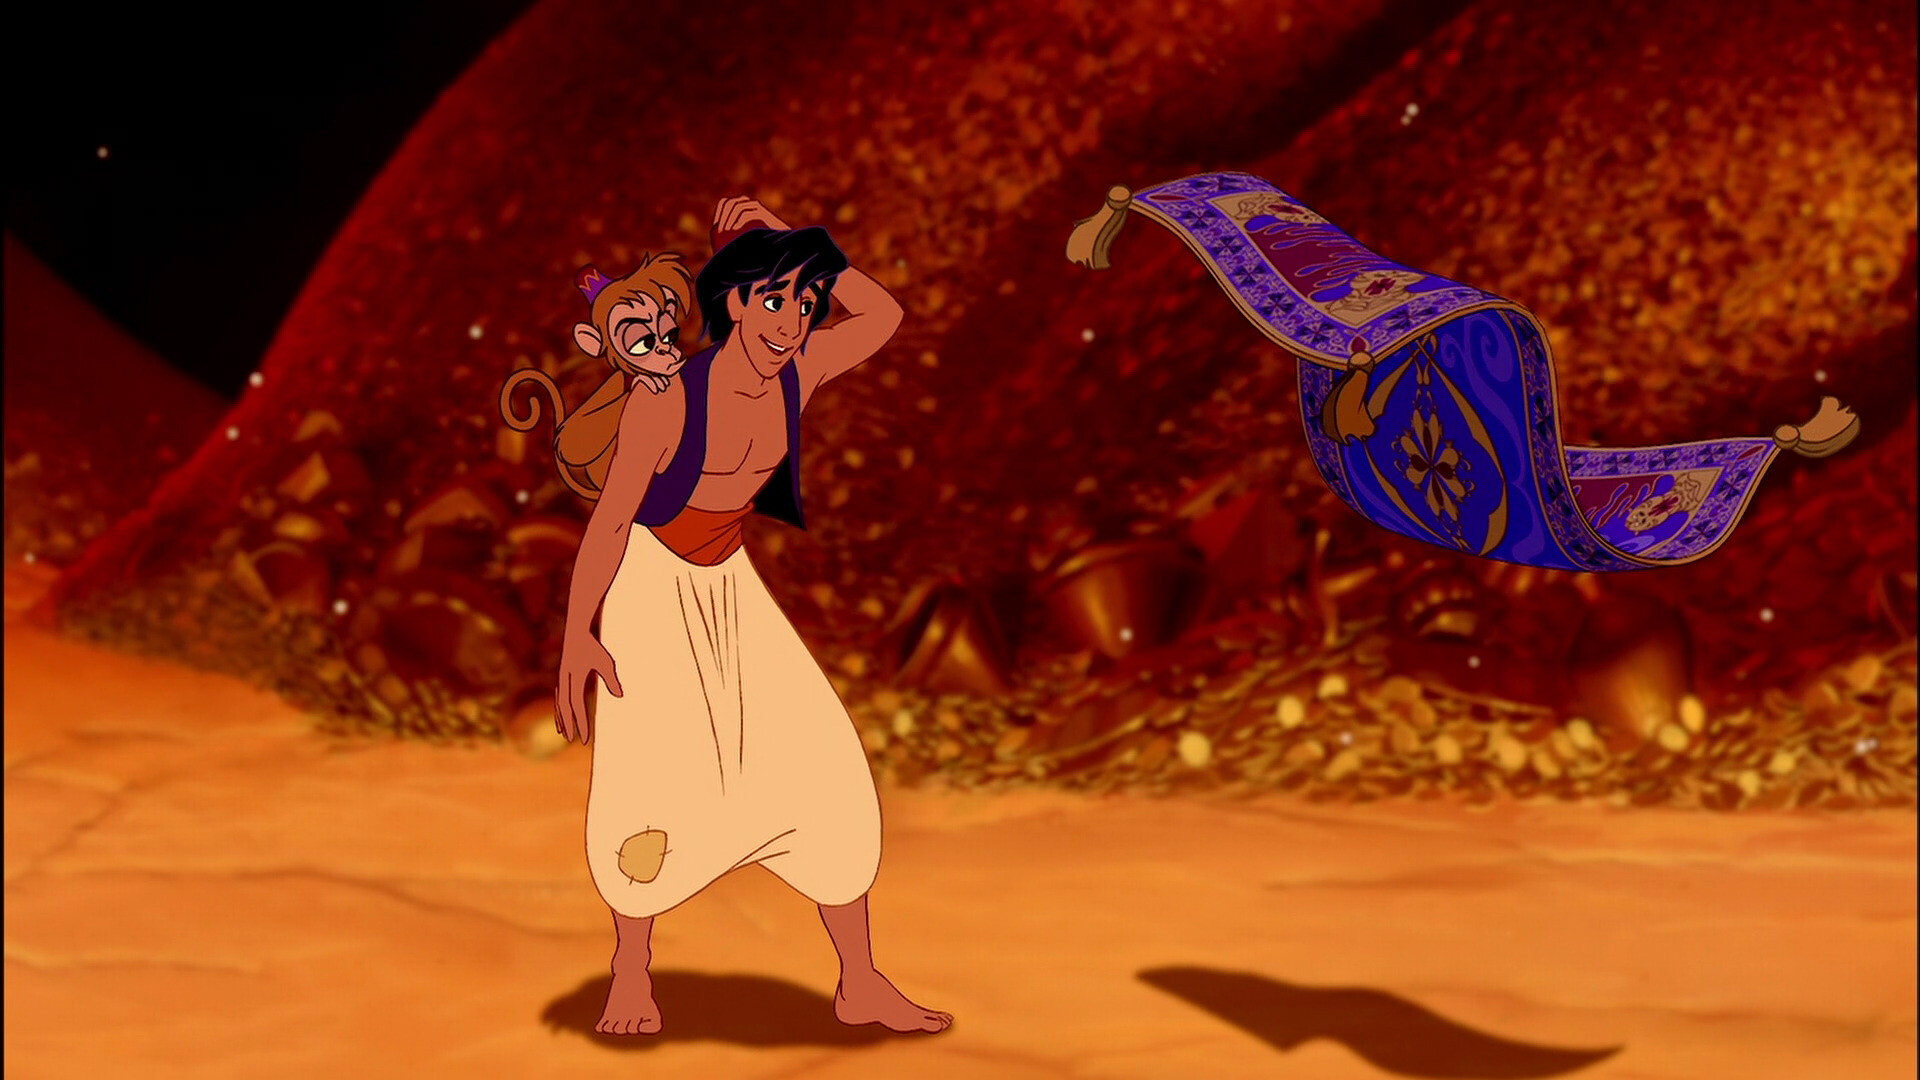 Aladdin (Cartoon): Released on November 25, 1992, the film is a loose adaptation of the Thousand and One Nights tale. 1920x1080 Full HD Background.